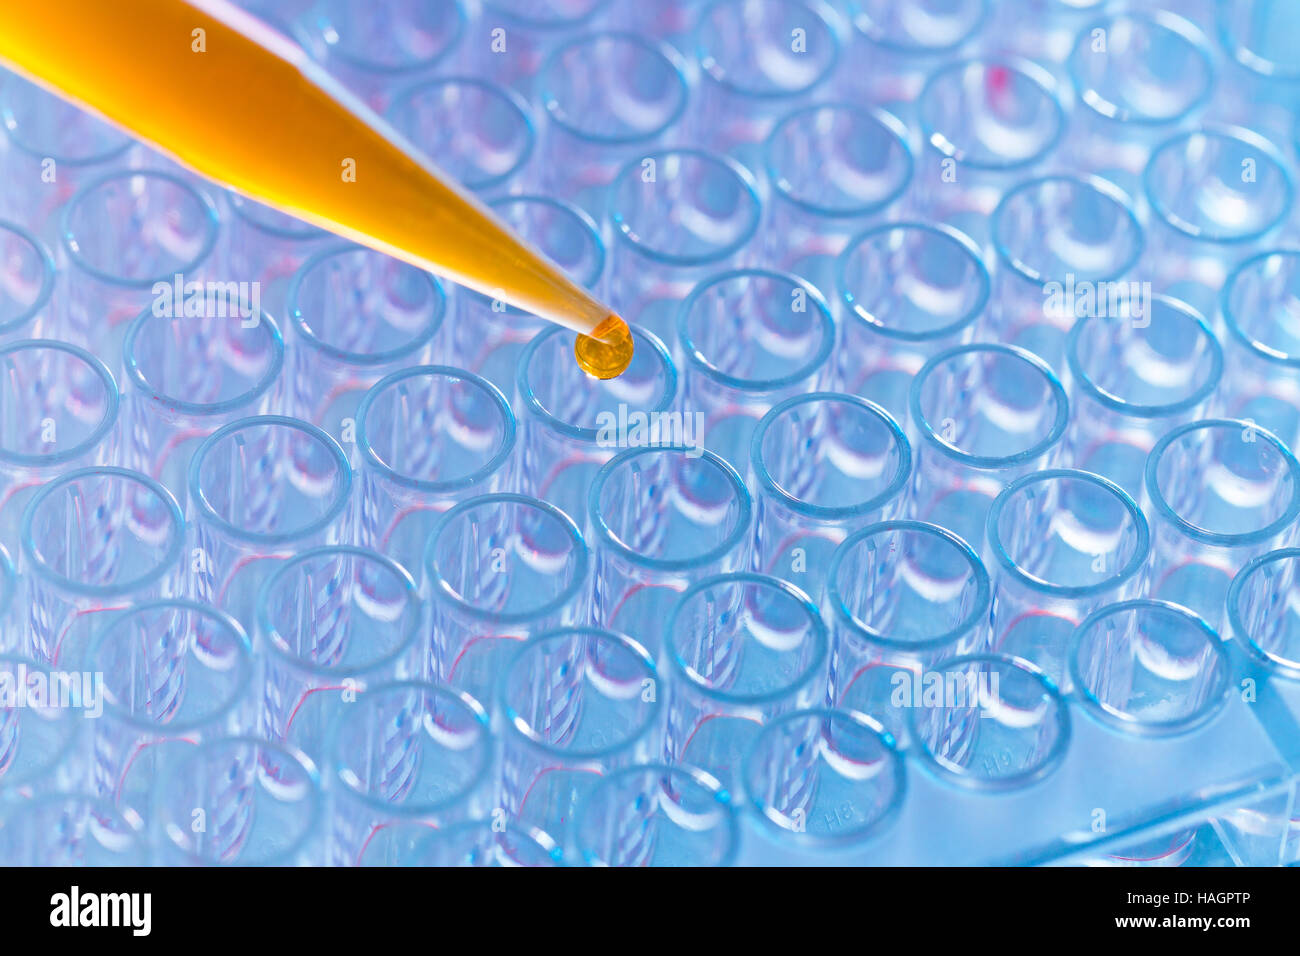 Pipette and 96 well plate Stock Photo